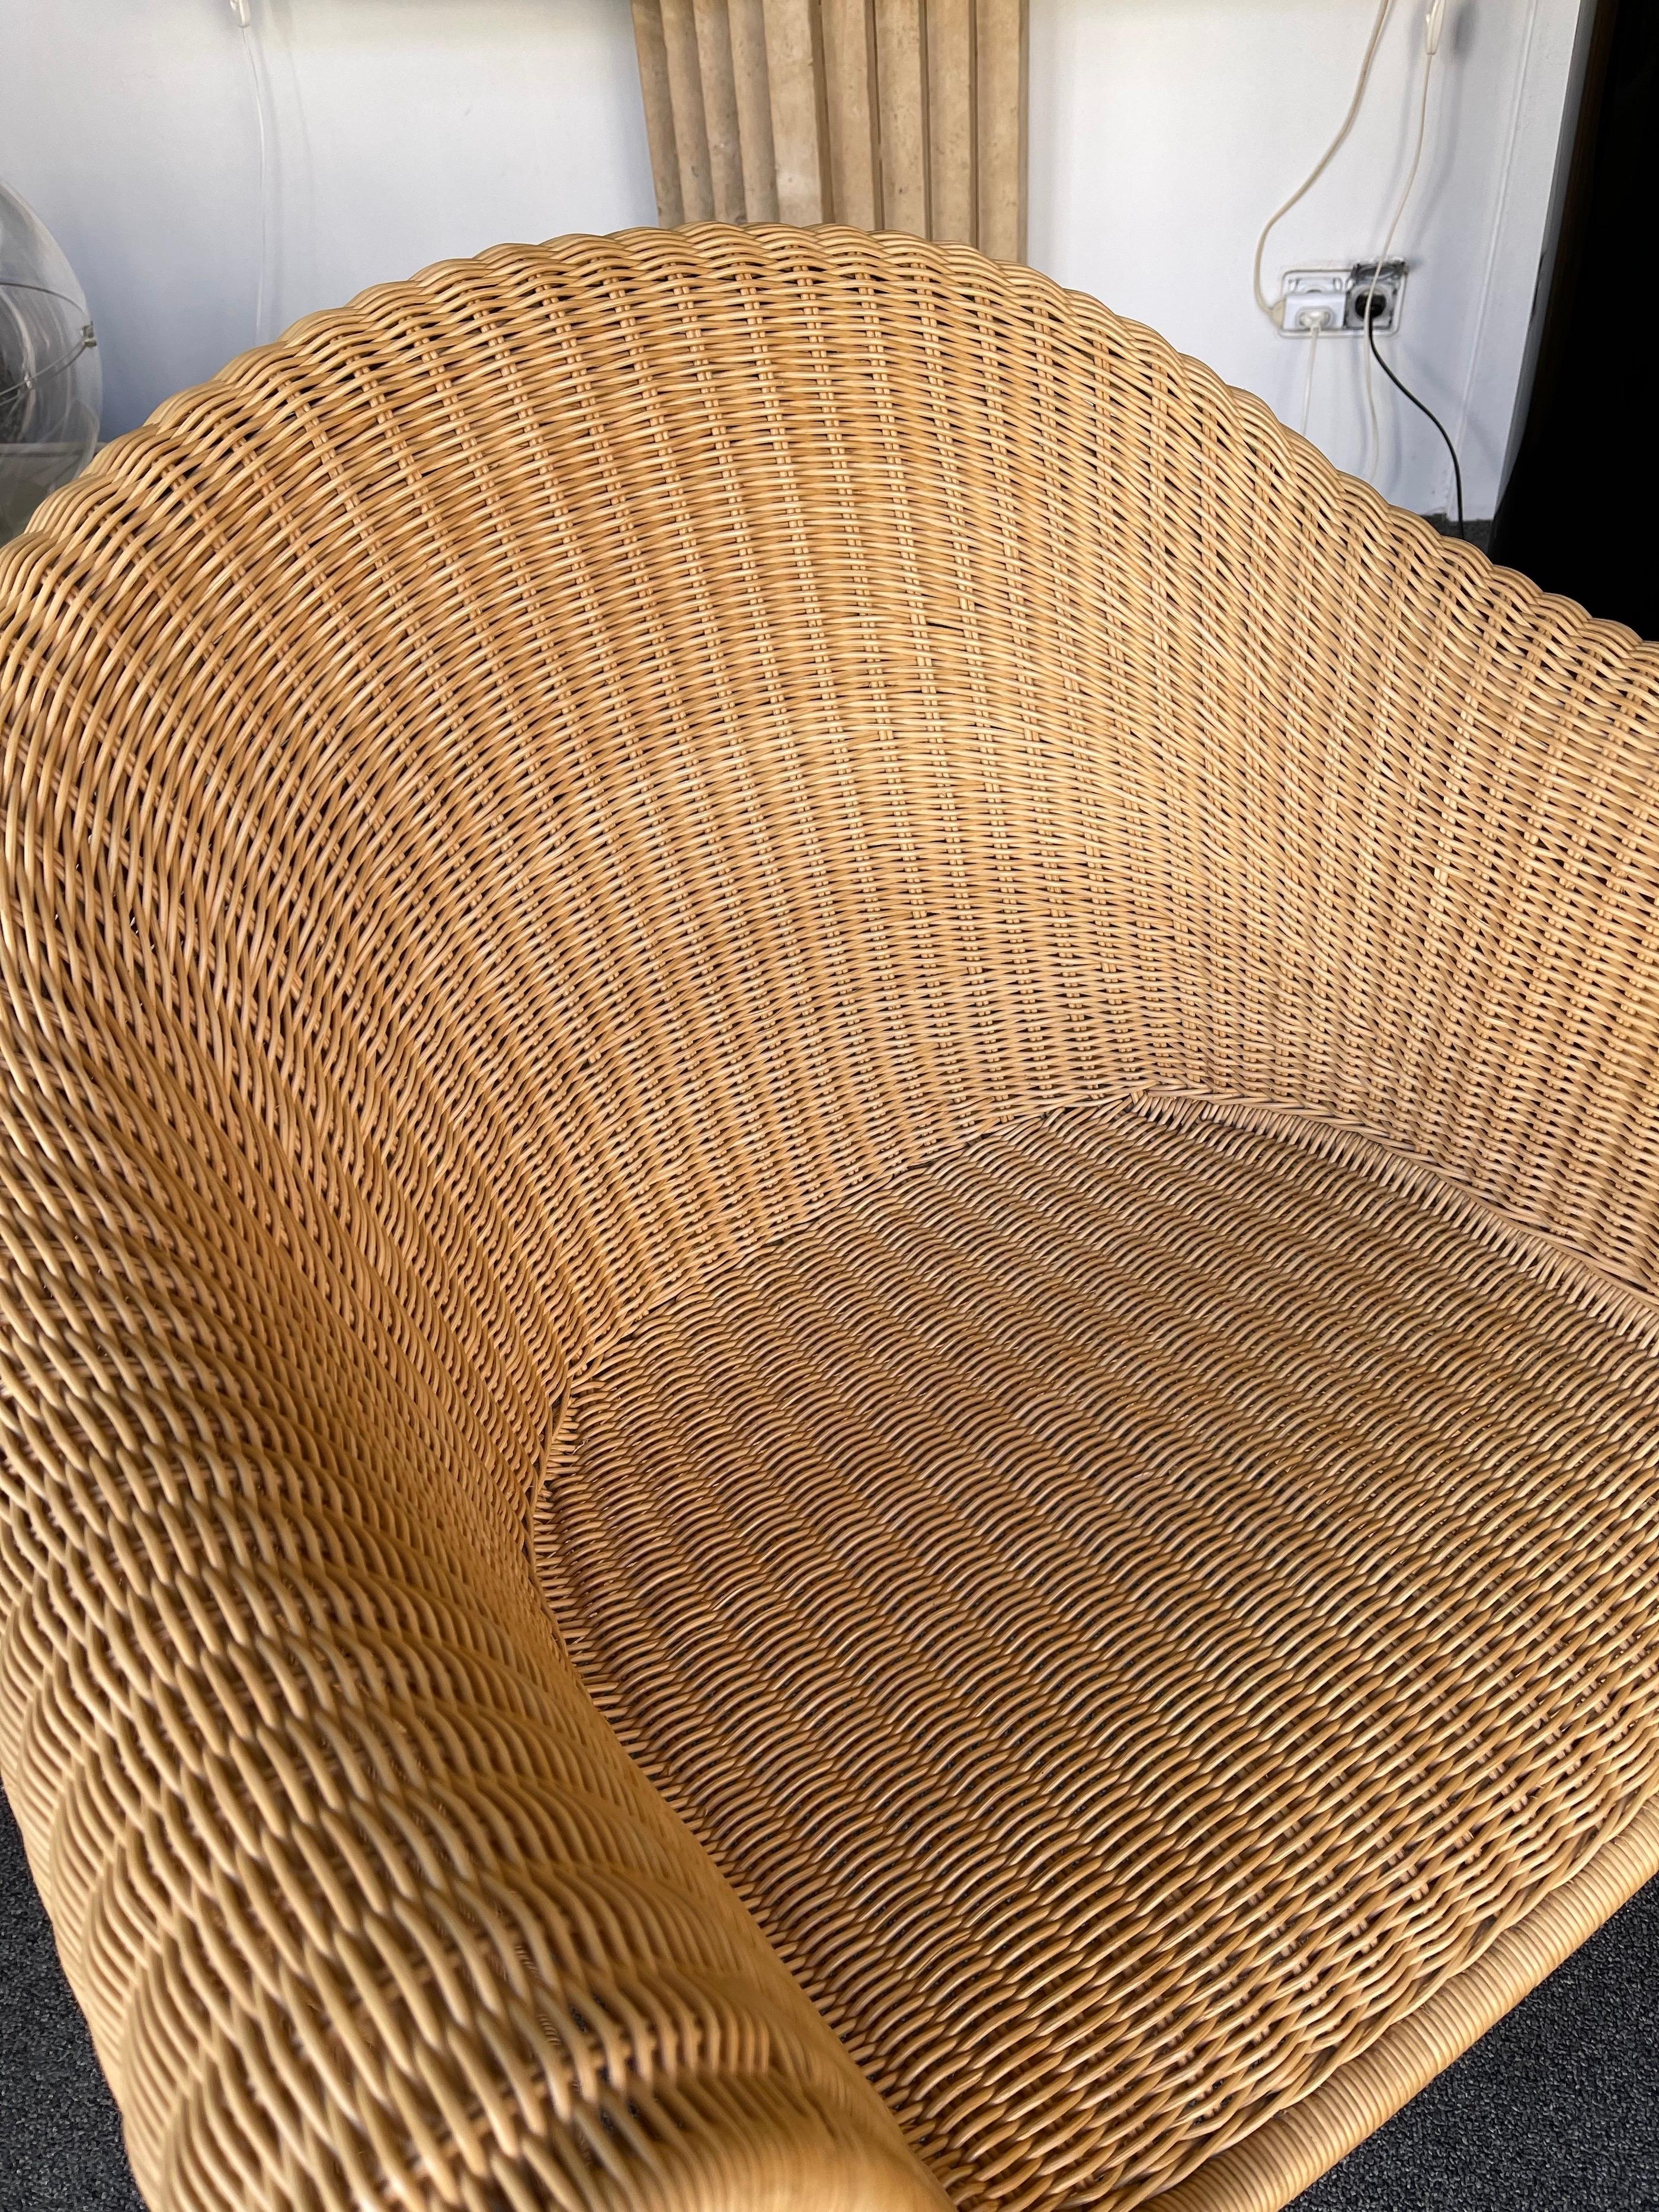 Pair of King Tubby Rattan Armchairs by Platt & Young for Driade, Italy, 1990s For Sale 4